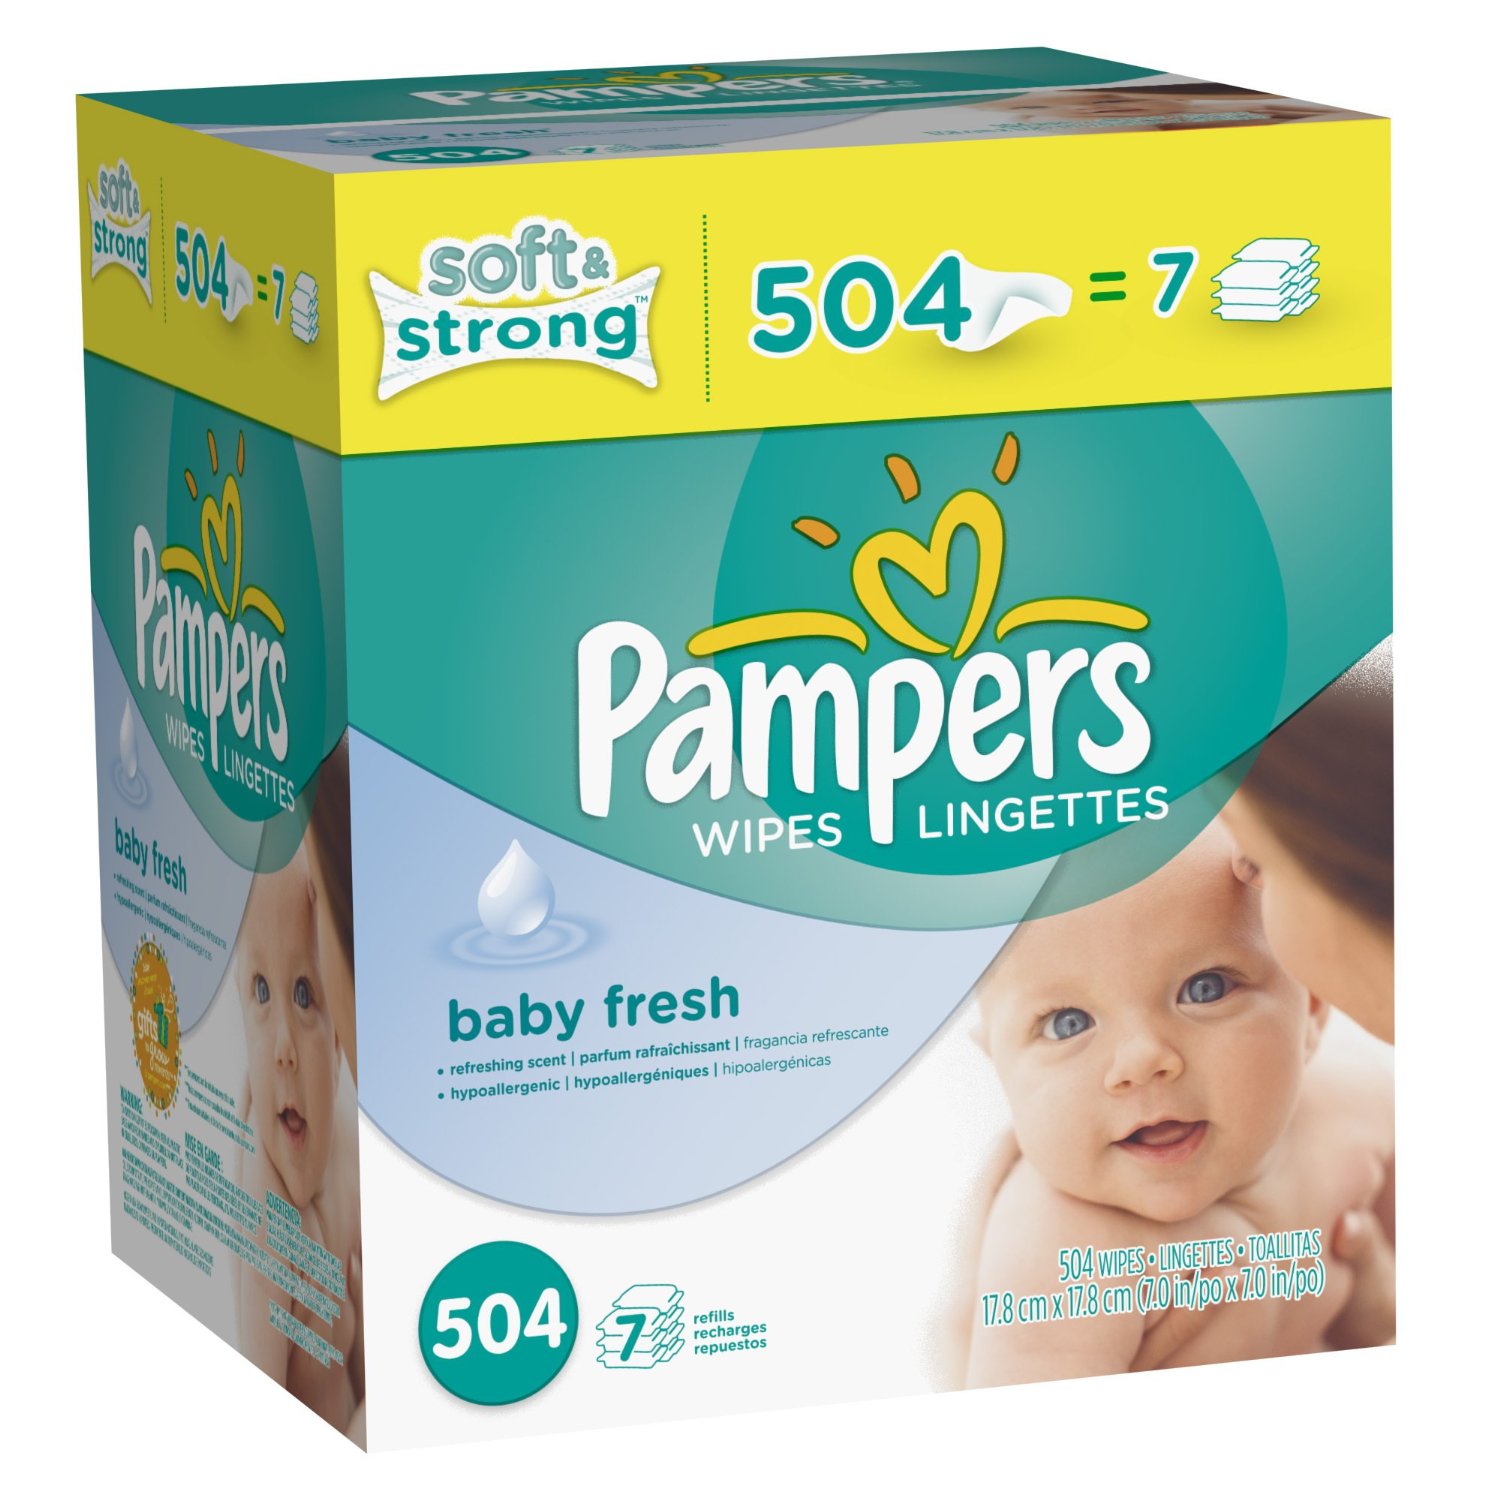 504 Pampers Baby Fresh Wipes $11.21 Shipped! Only 2 Cents Per Wipe ...